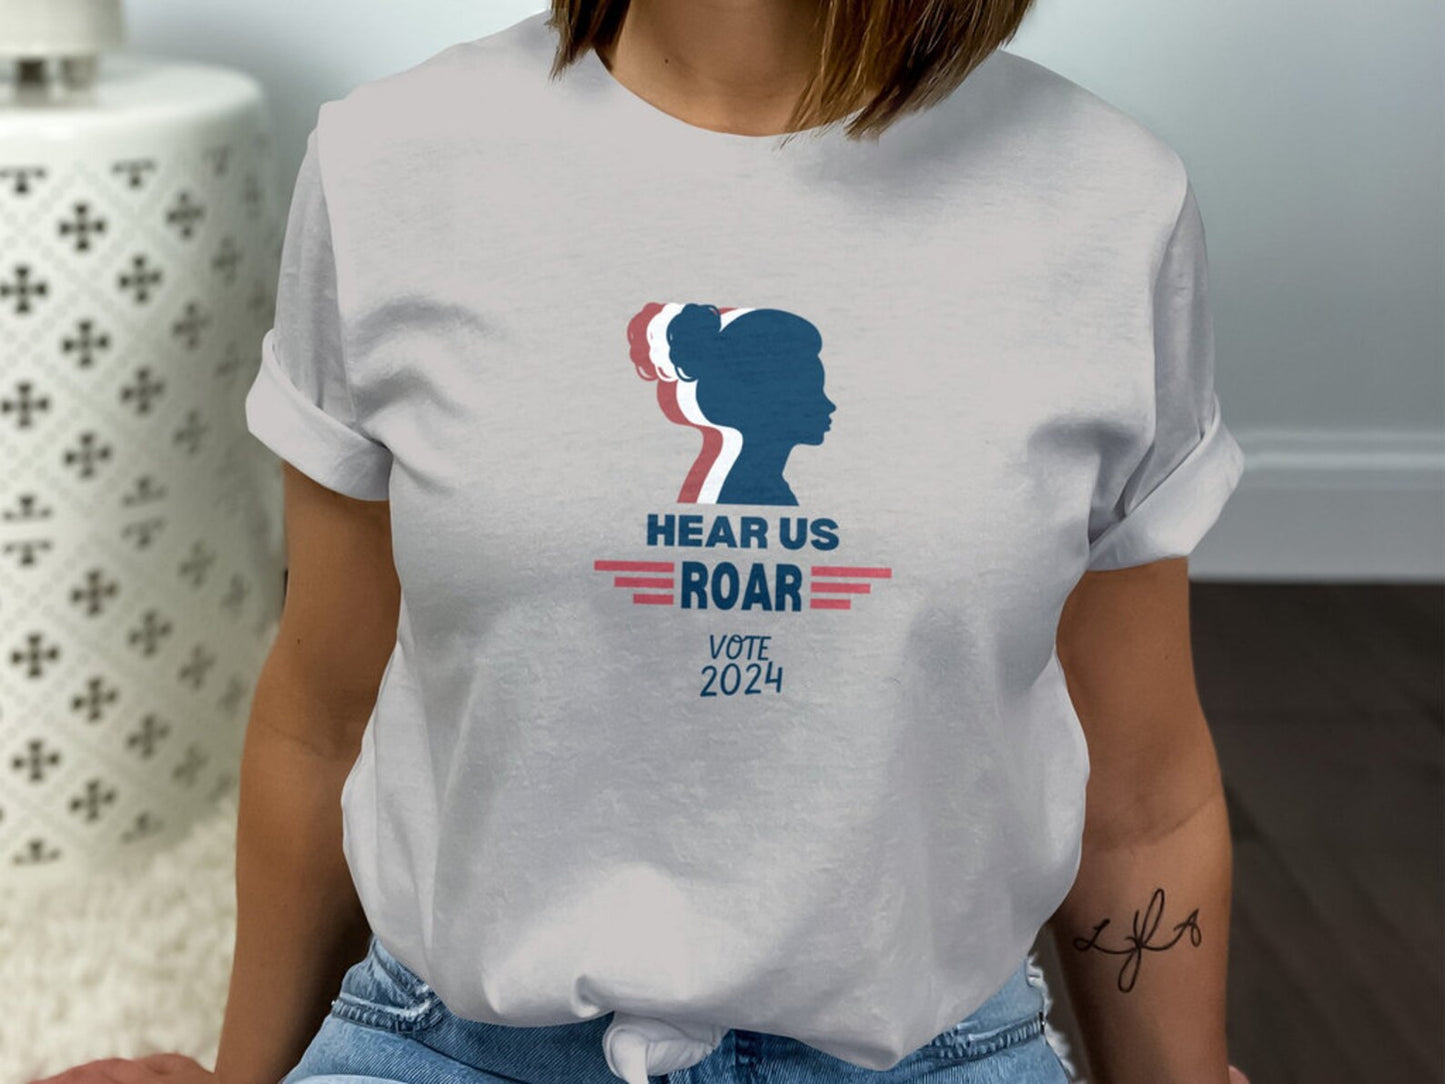 Women Vote 2024 Tshirt, Hear Me Roar Vote 2024, Women's Political Tee, Roe V. Wade Shirt, Gift for Her, Election 2024, I Am Woman